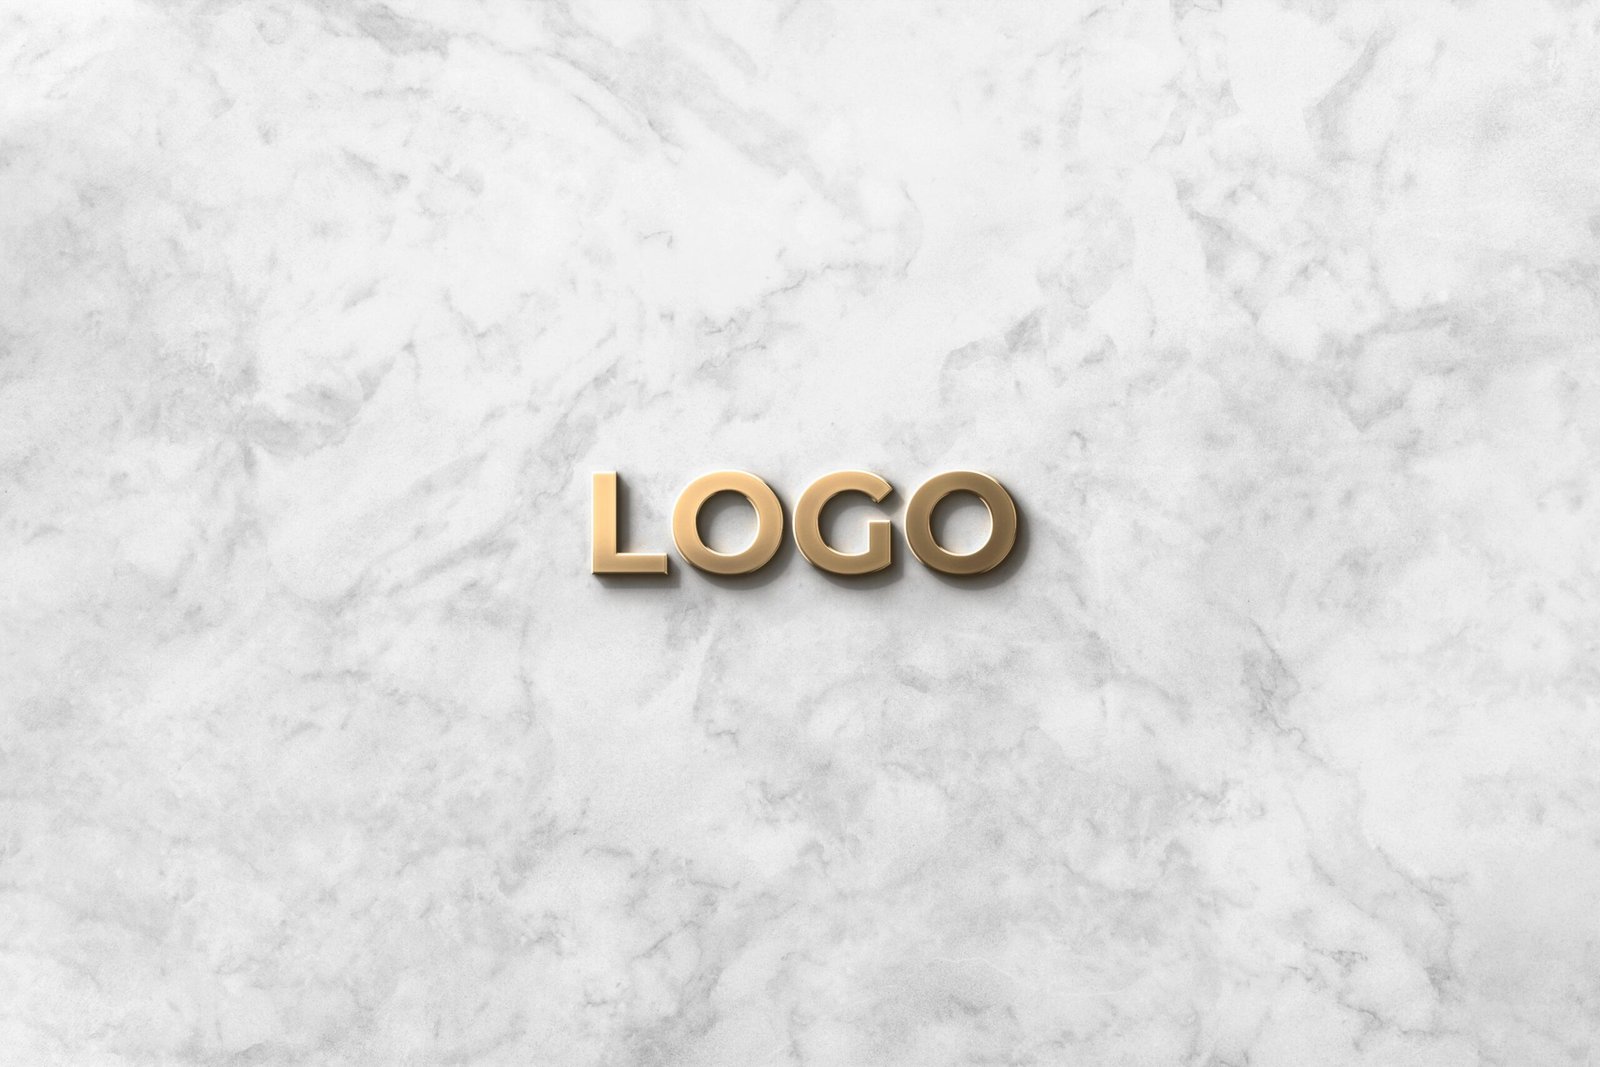 Does Your Logo Translate Your Brand Vibe. Let’s think!